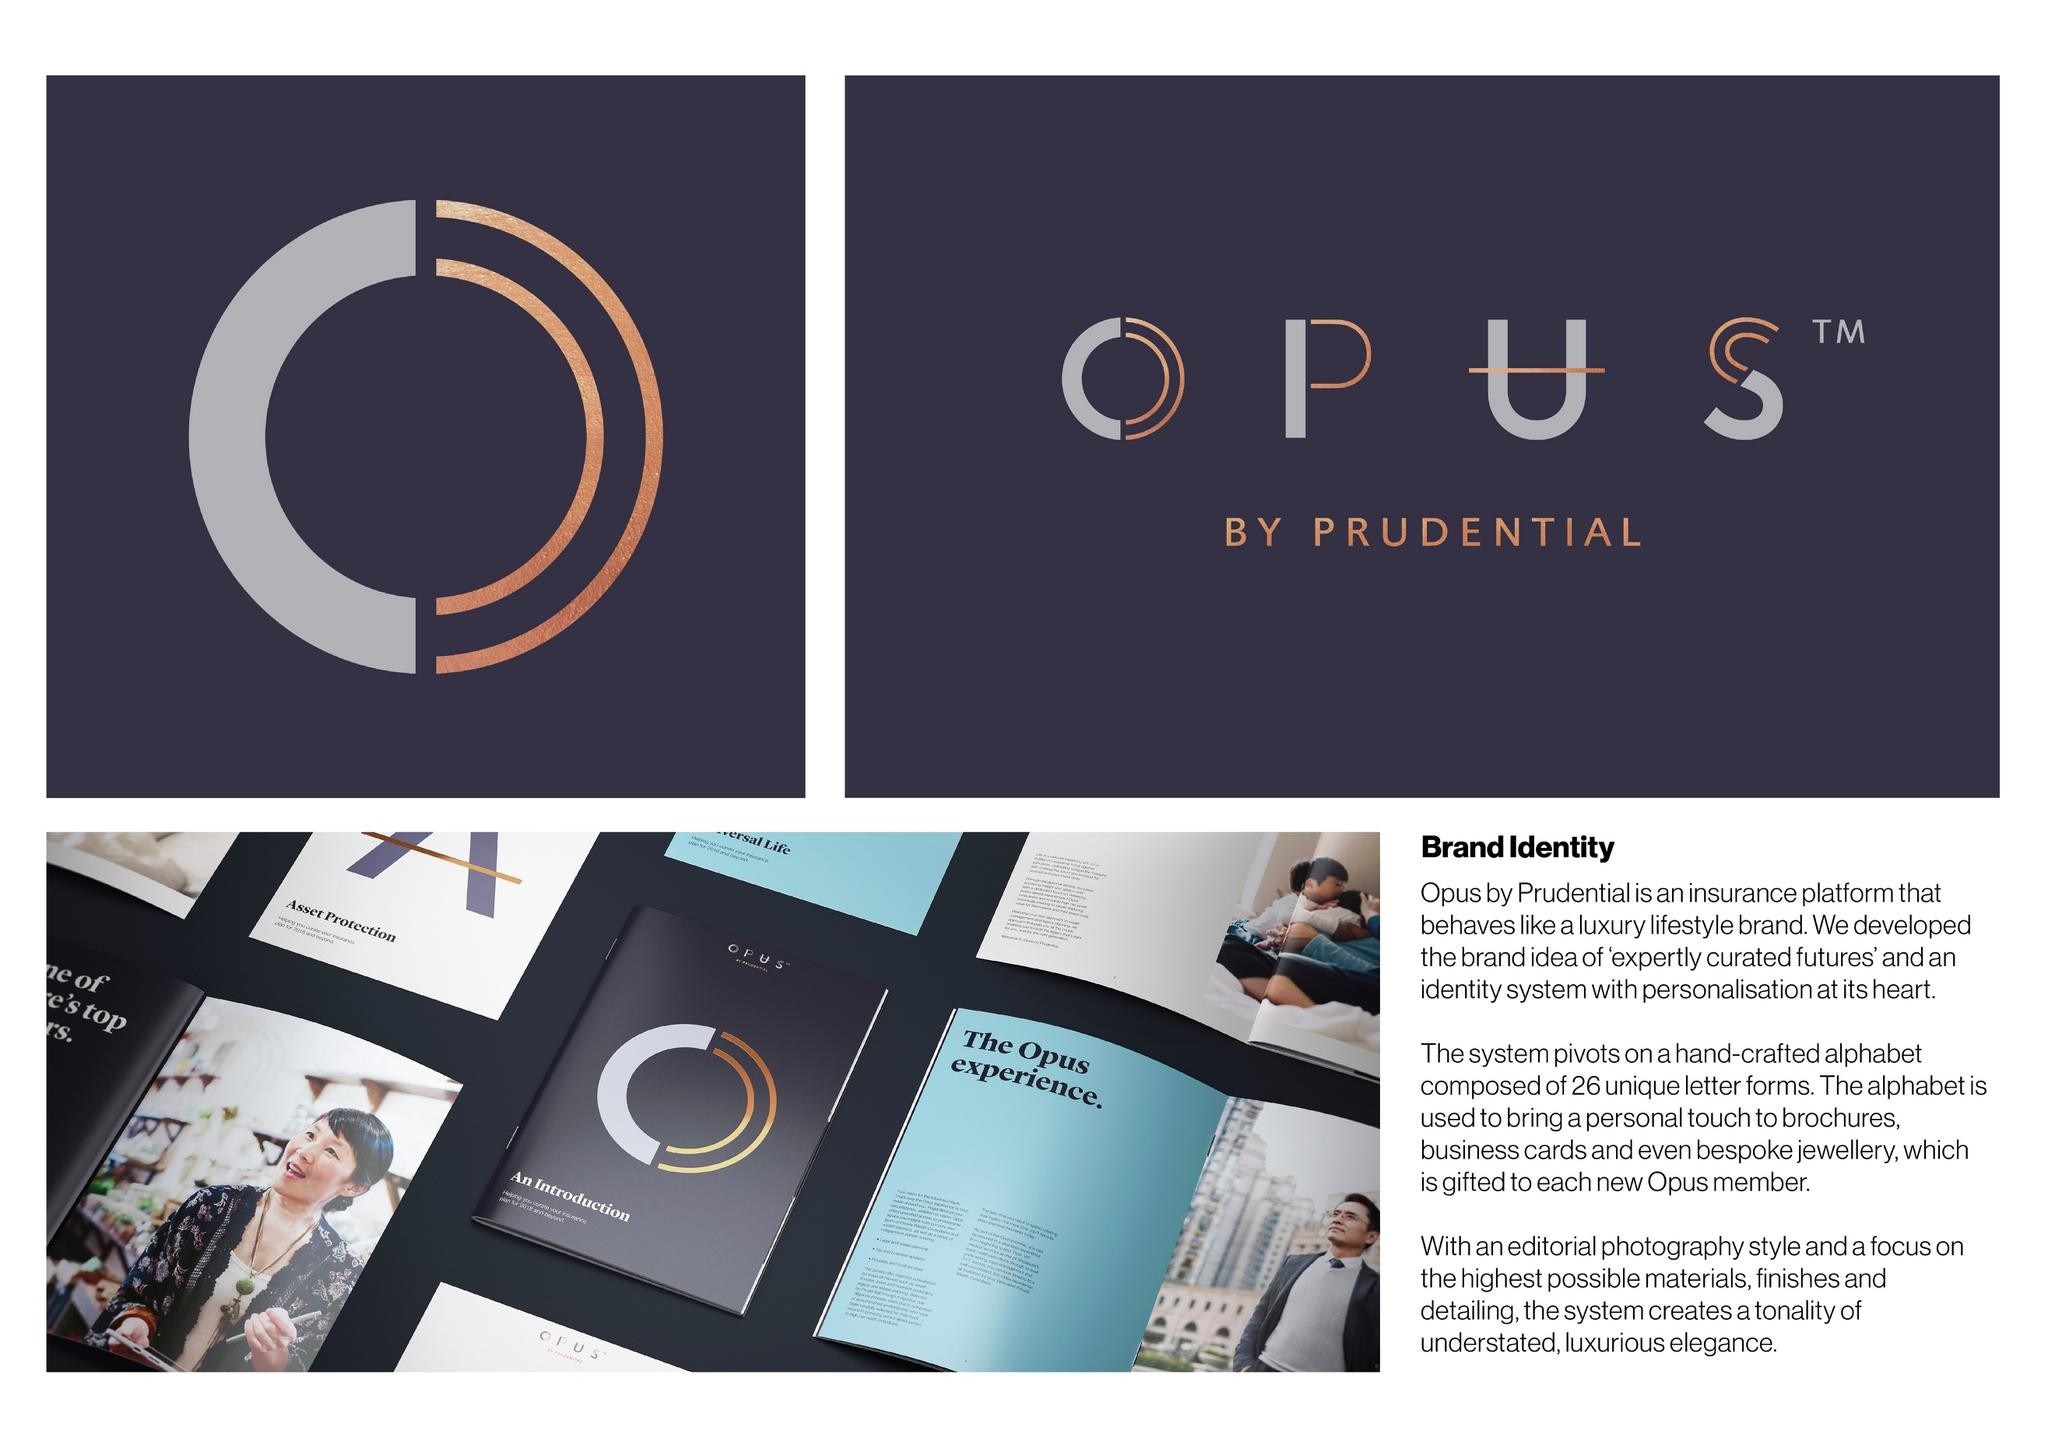 Opus by Prudential